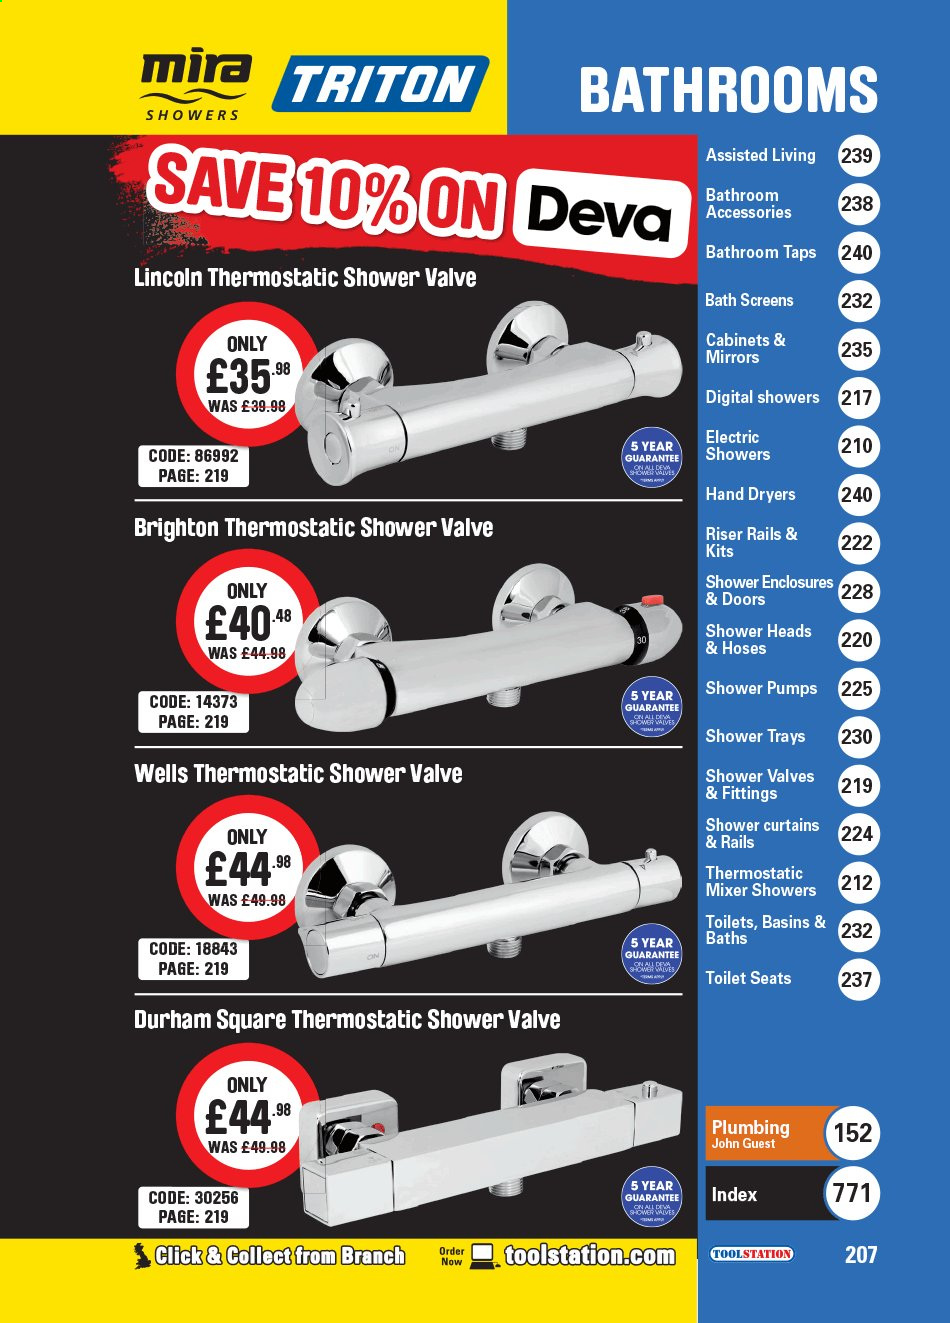 Toolstation offer . Page 207.